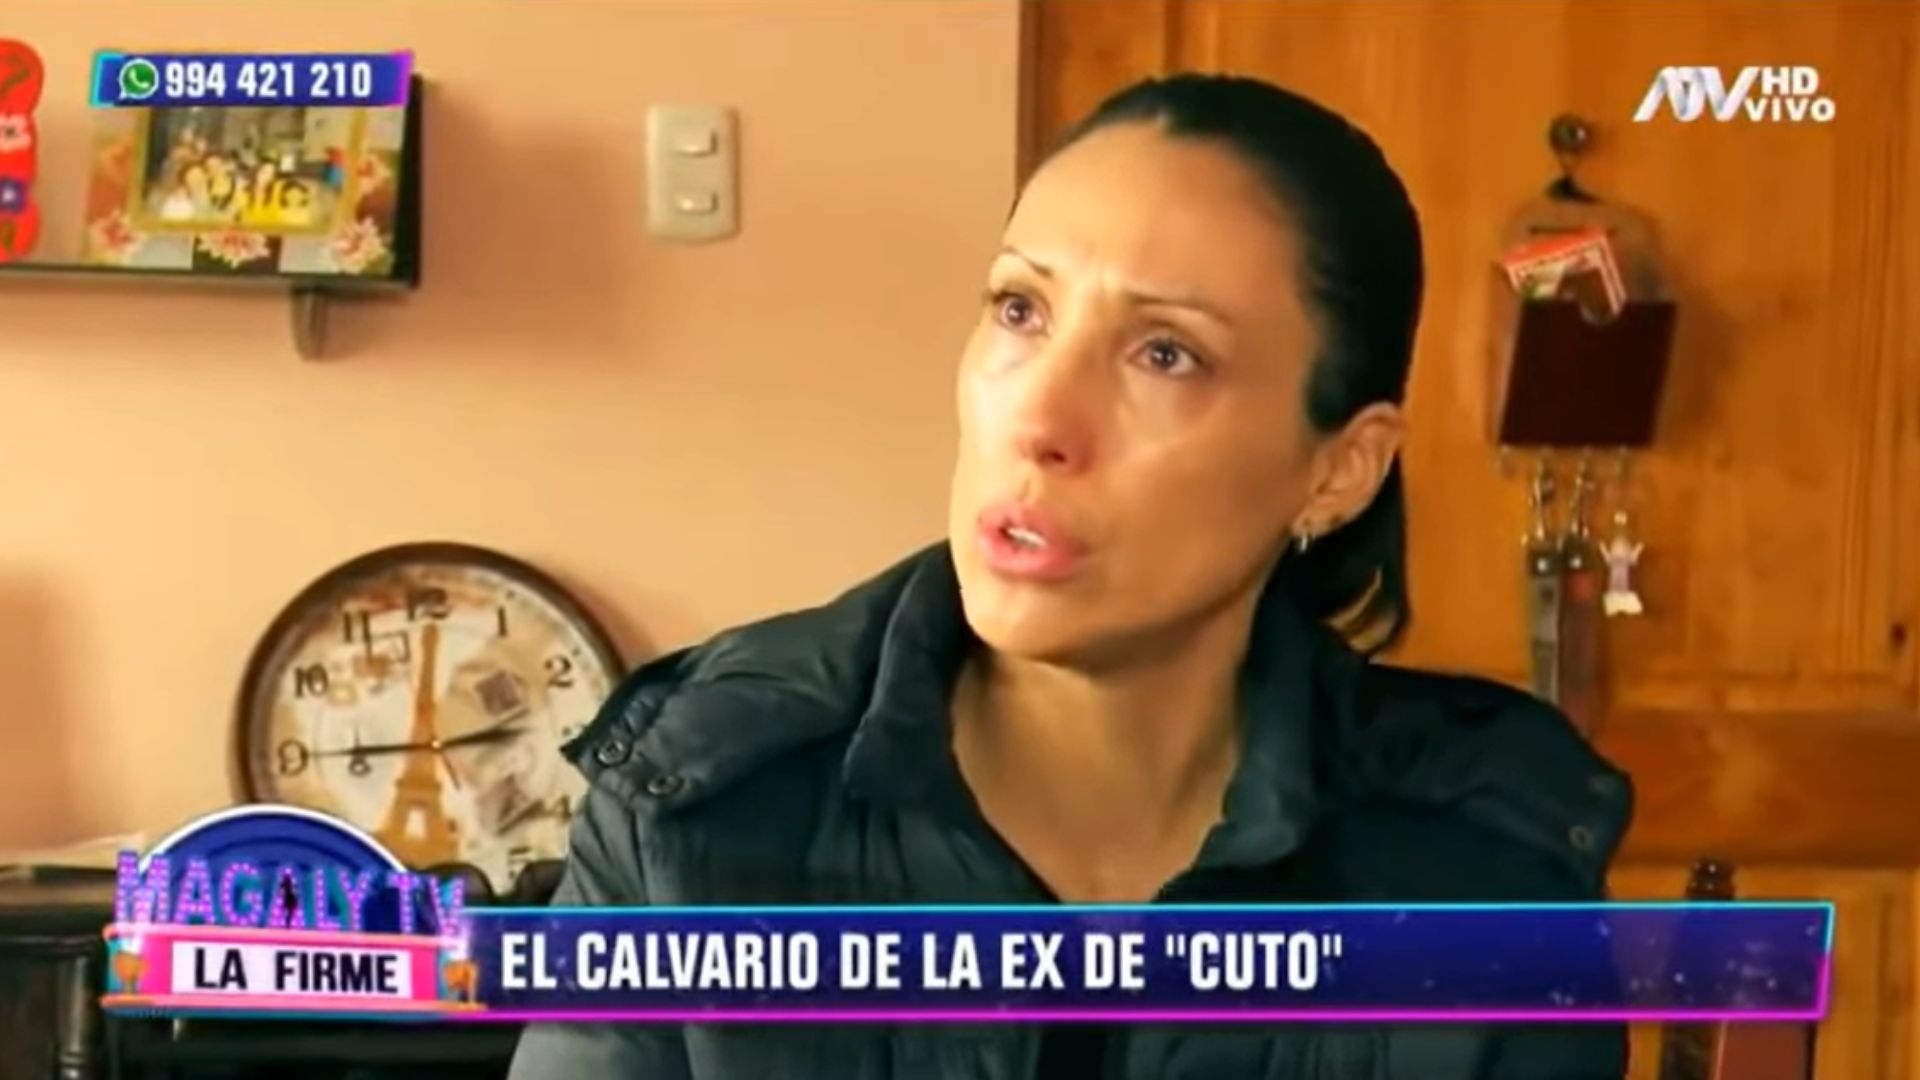 Magaly Medina issued a report on the ex-wife of 